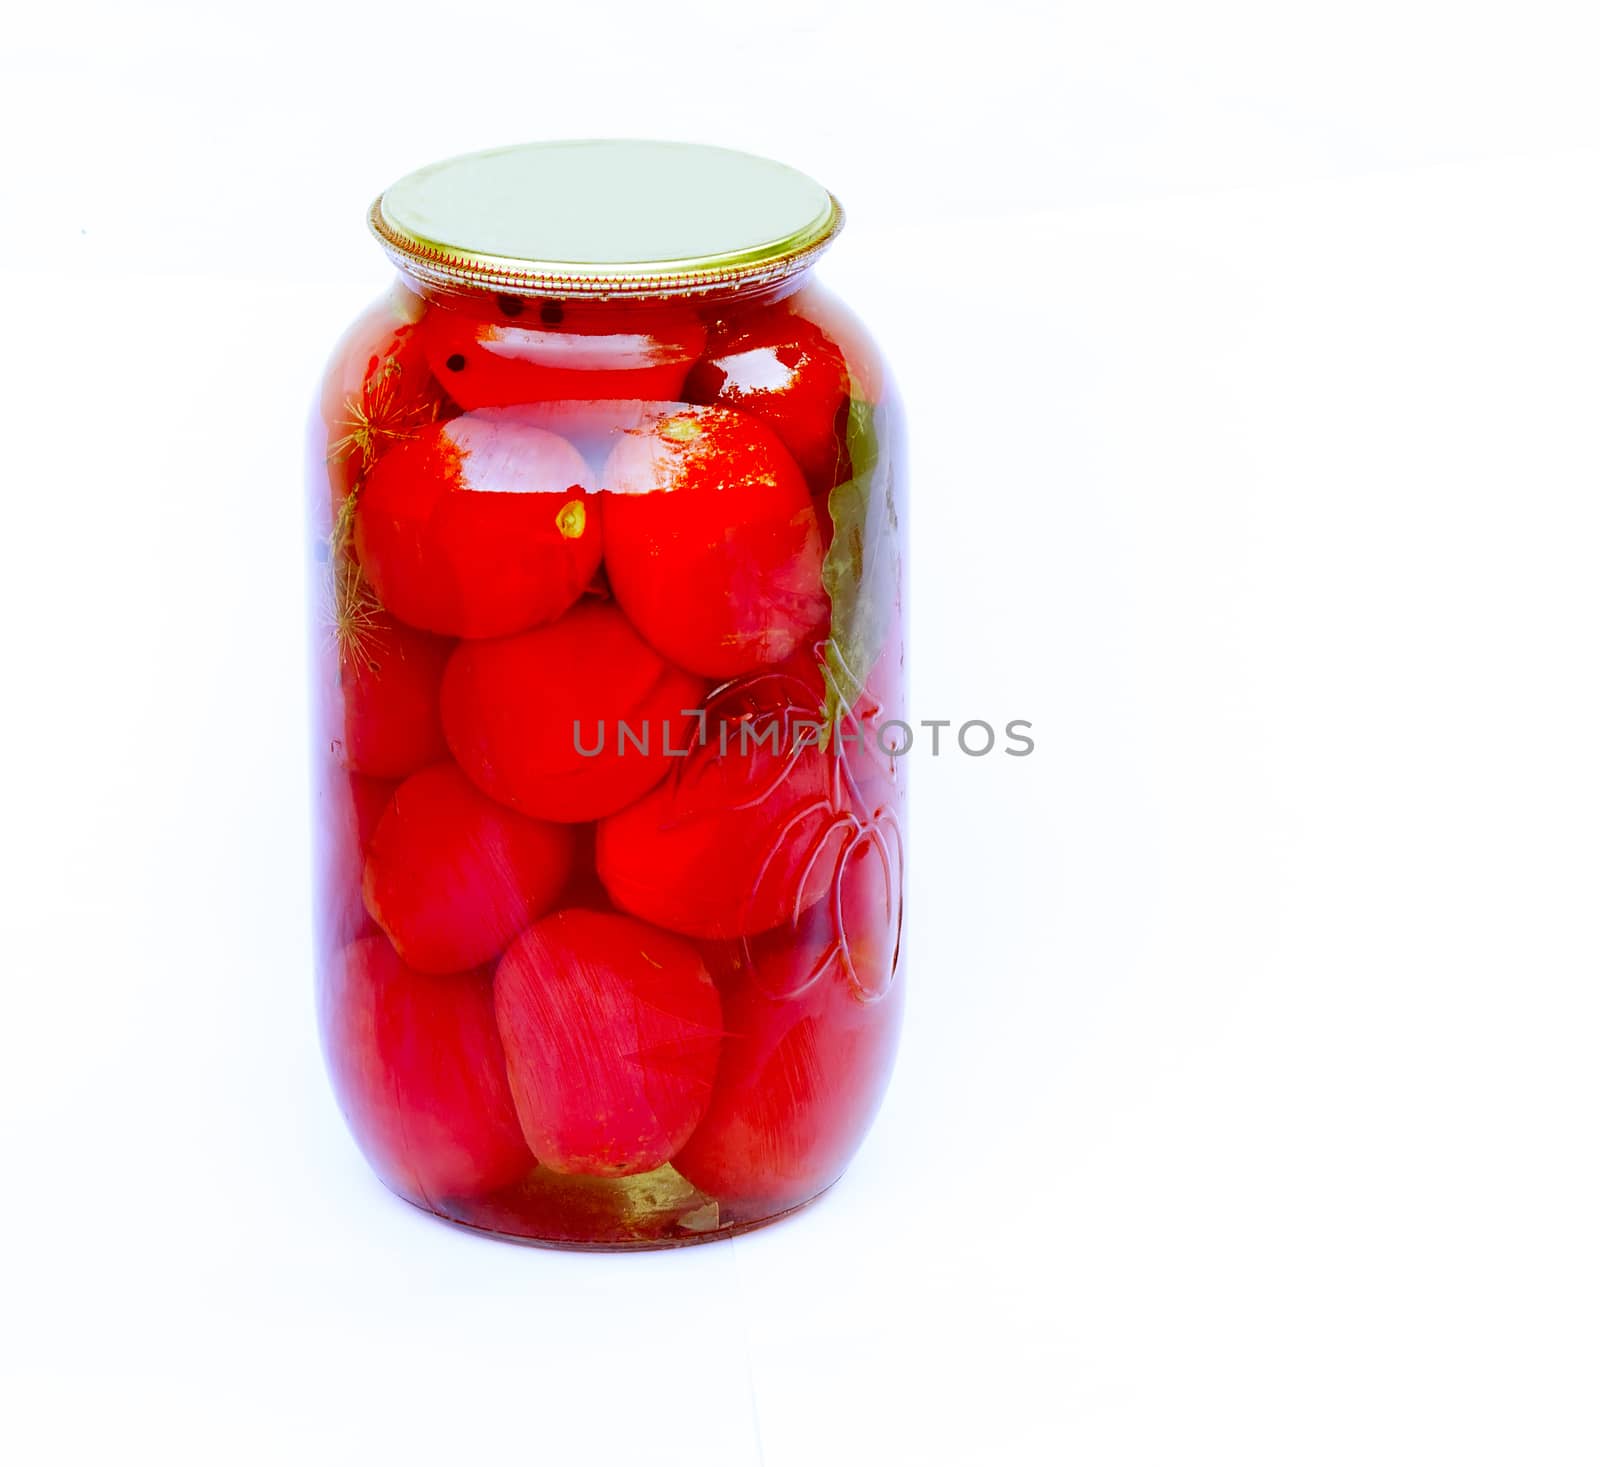 Canned tomatoes in a large glass jar on white background by georgina198